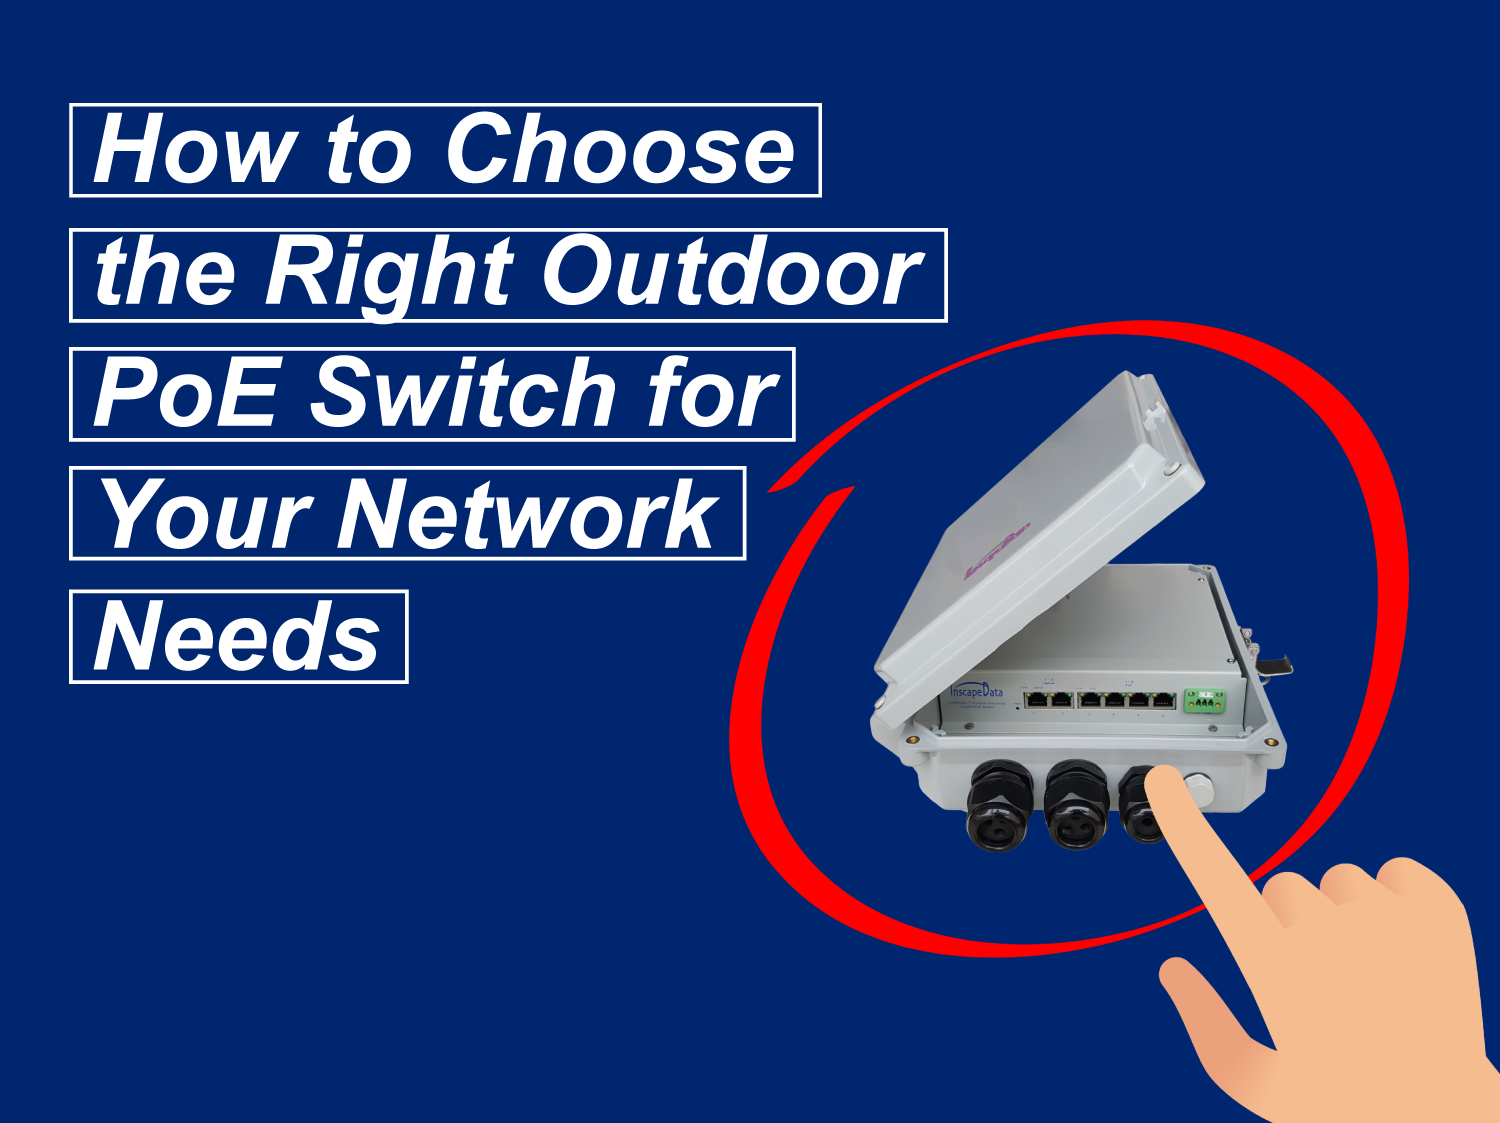 How to Choose the Right Outdoor PoE Switch for Your Network Needs